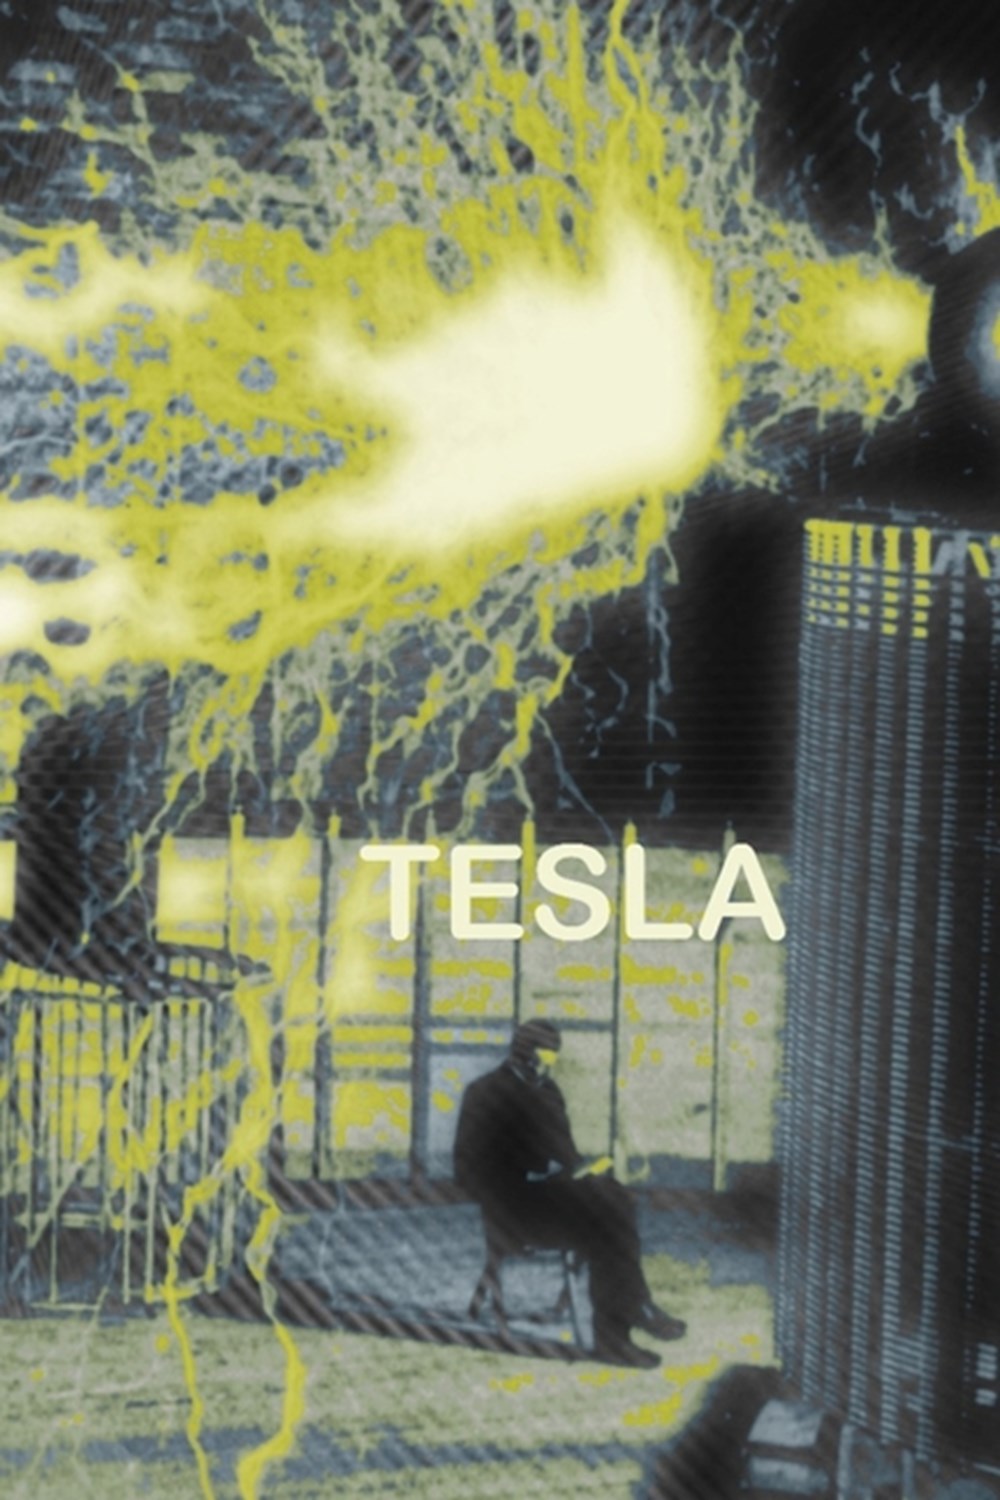 Tesla Tesla with Bulb Electricity 1890's Lined Journal from Nikola Tesla to Inspire You and Make You